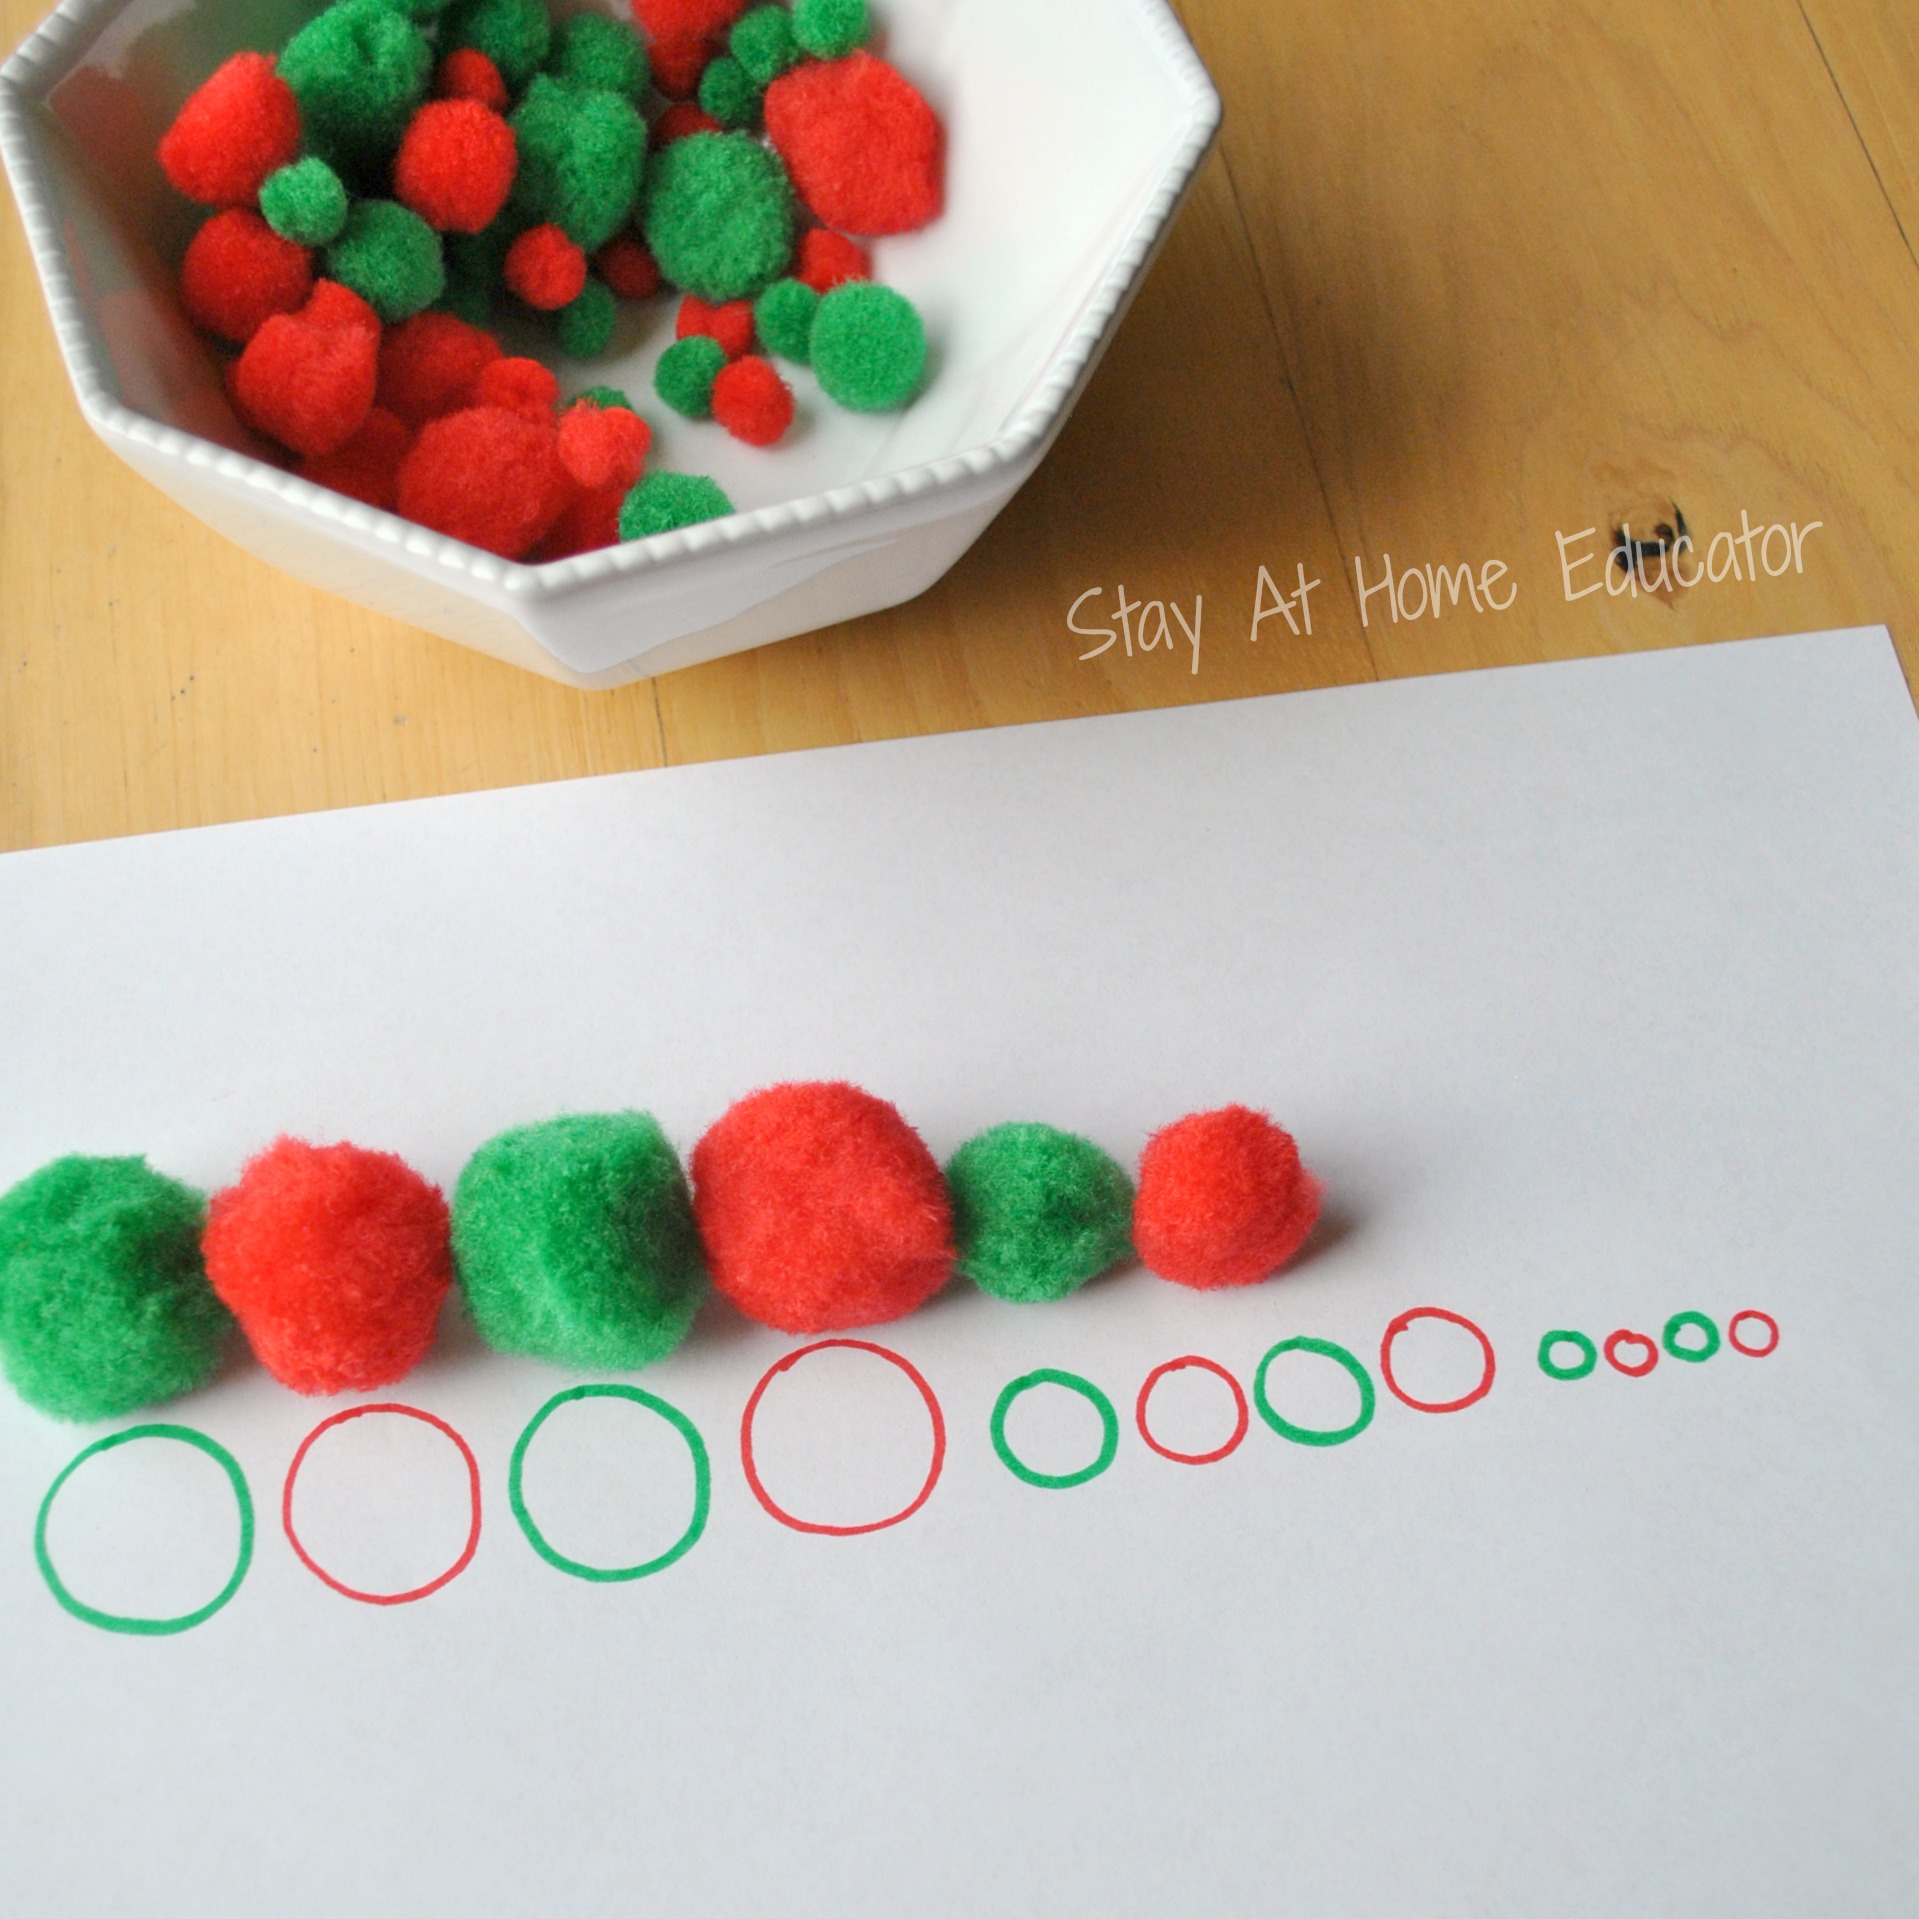 different sized pom poms are used when exploring how to teach measurement to preschoolers